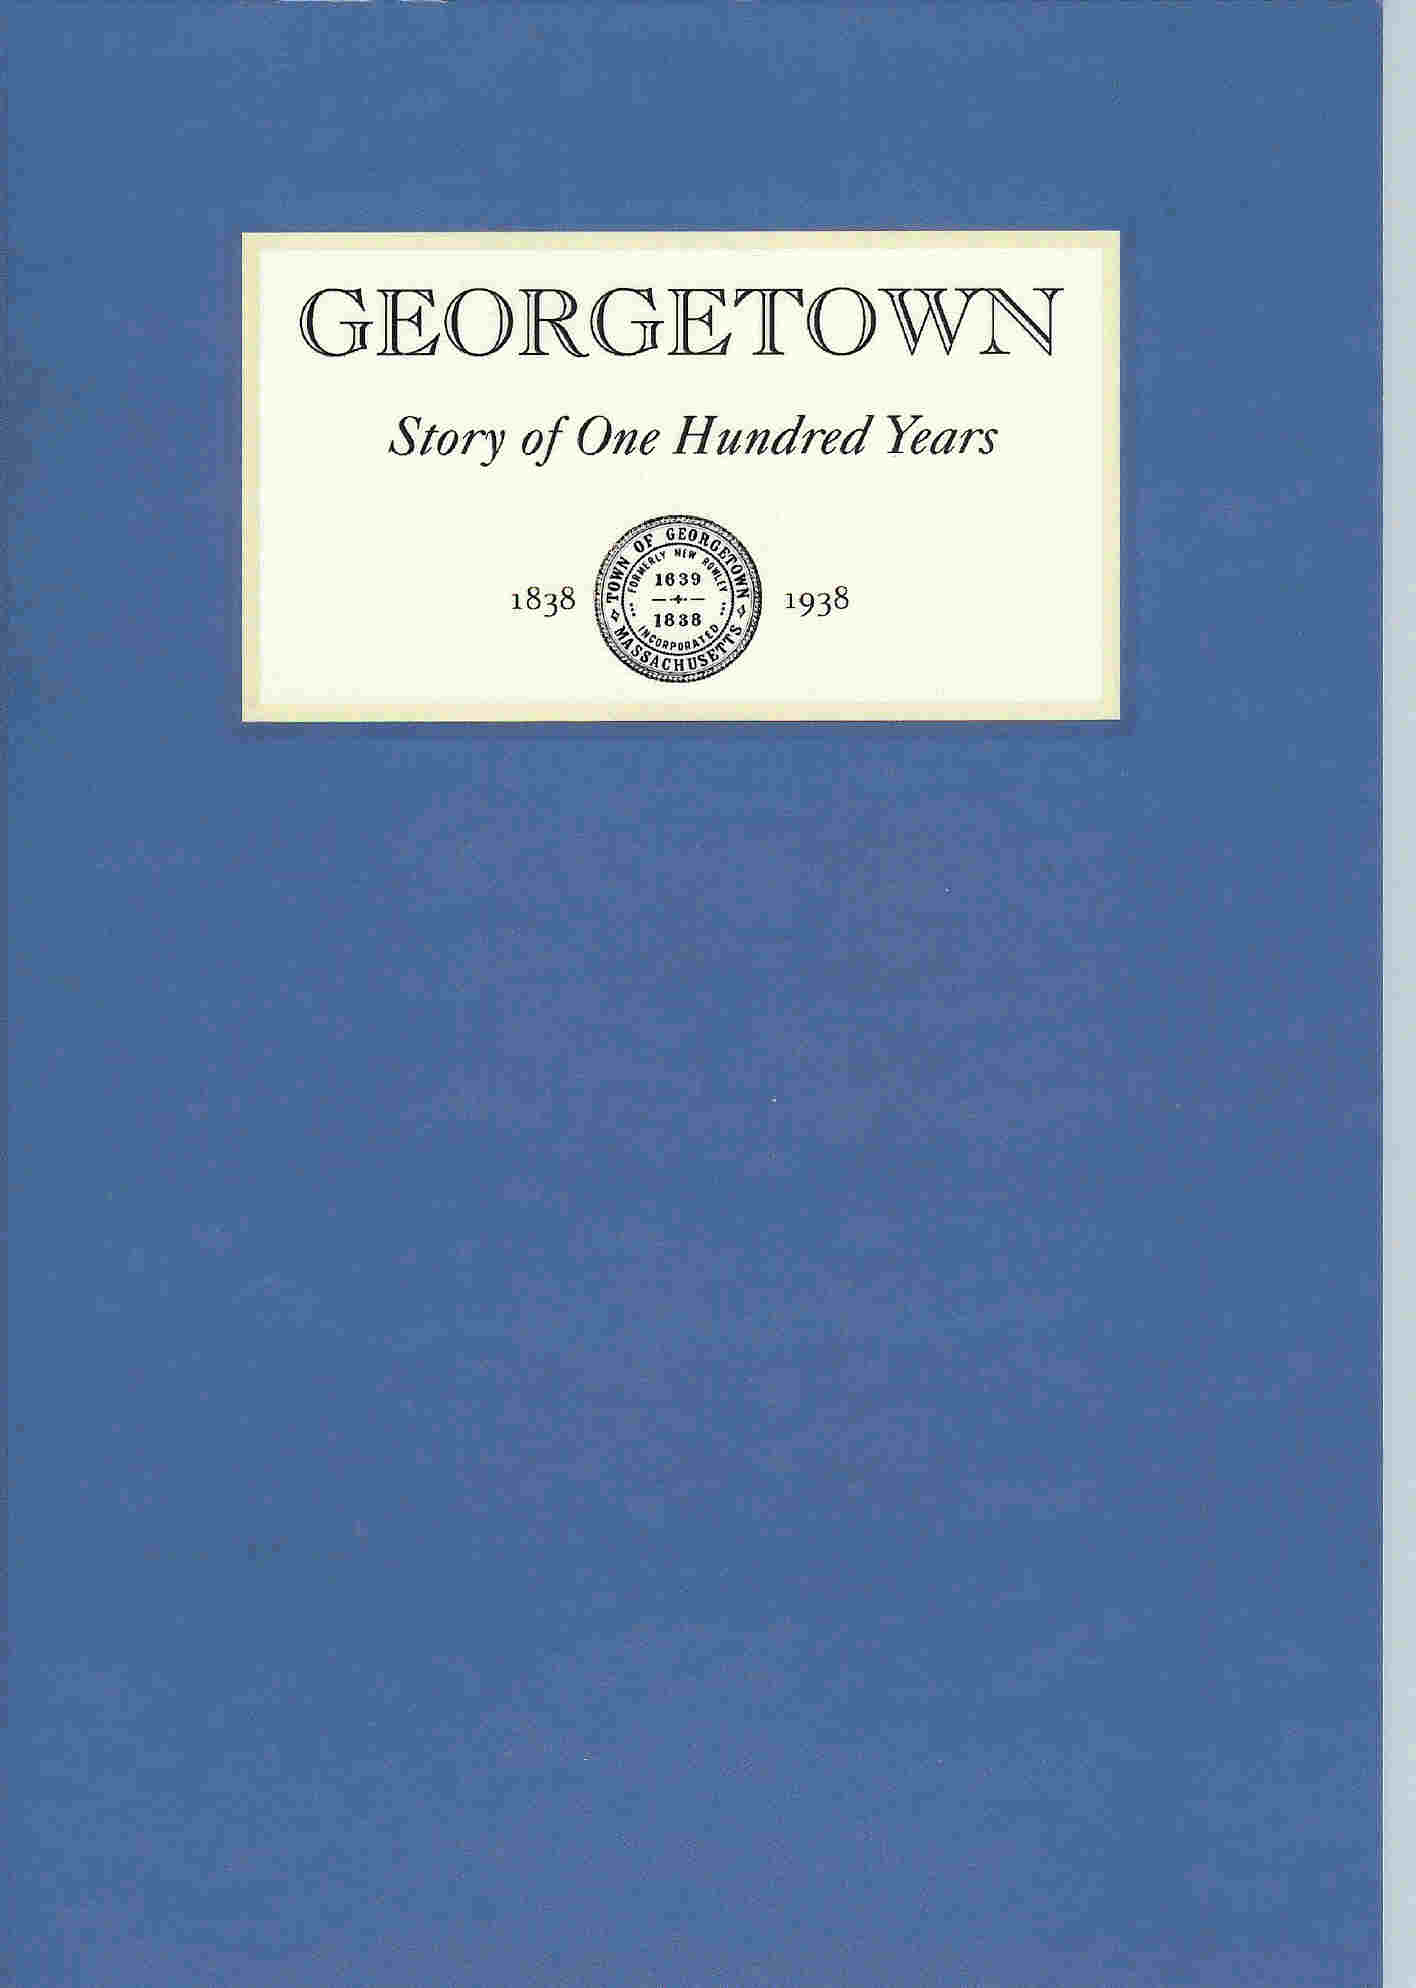 Georgetown-Story of 100 Years Cover